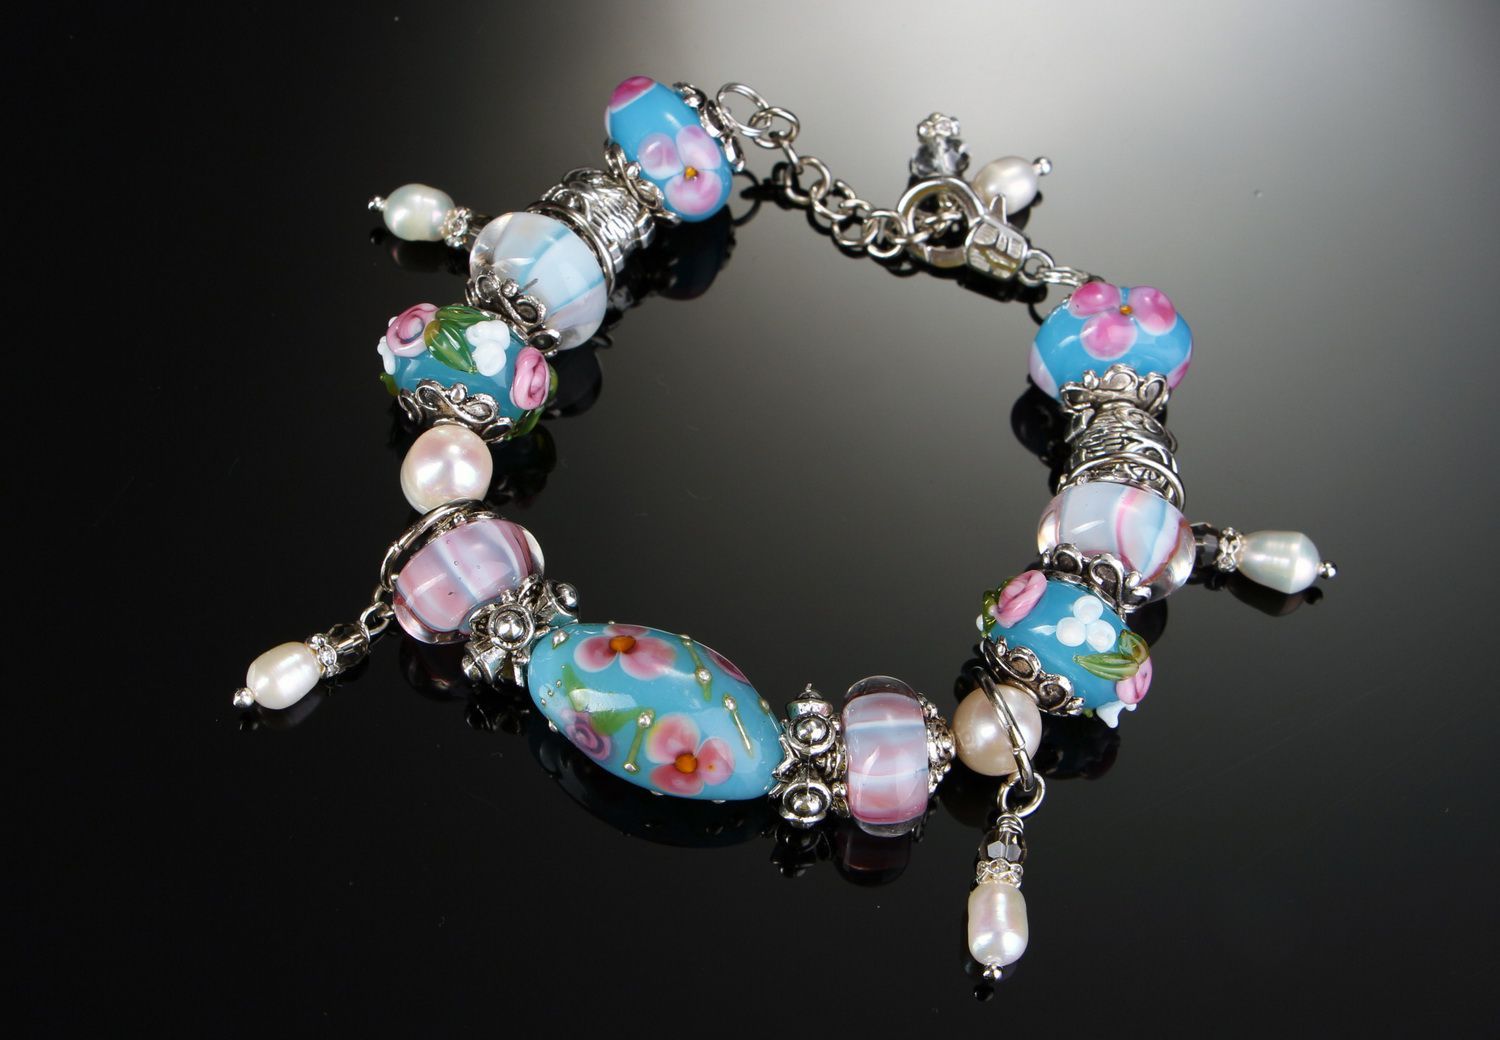 Bracelet made from river pearls and Italian glass Shabby chic photo 2